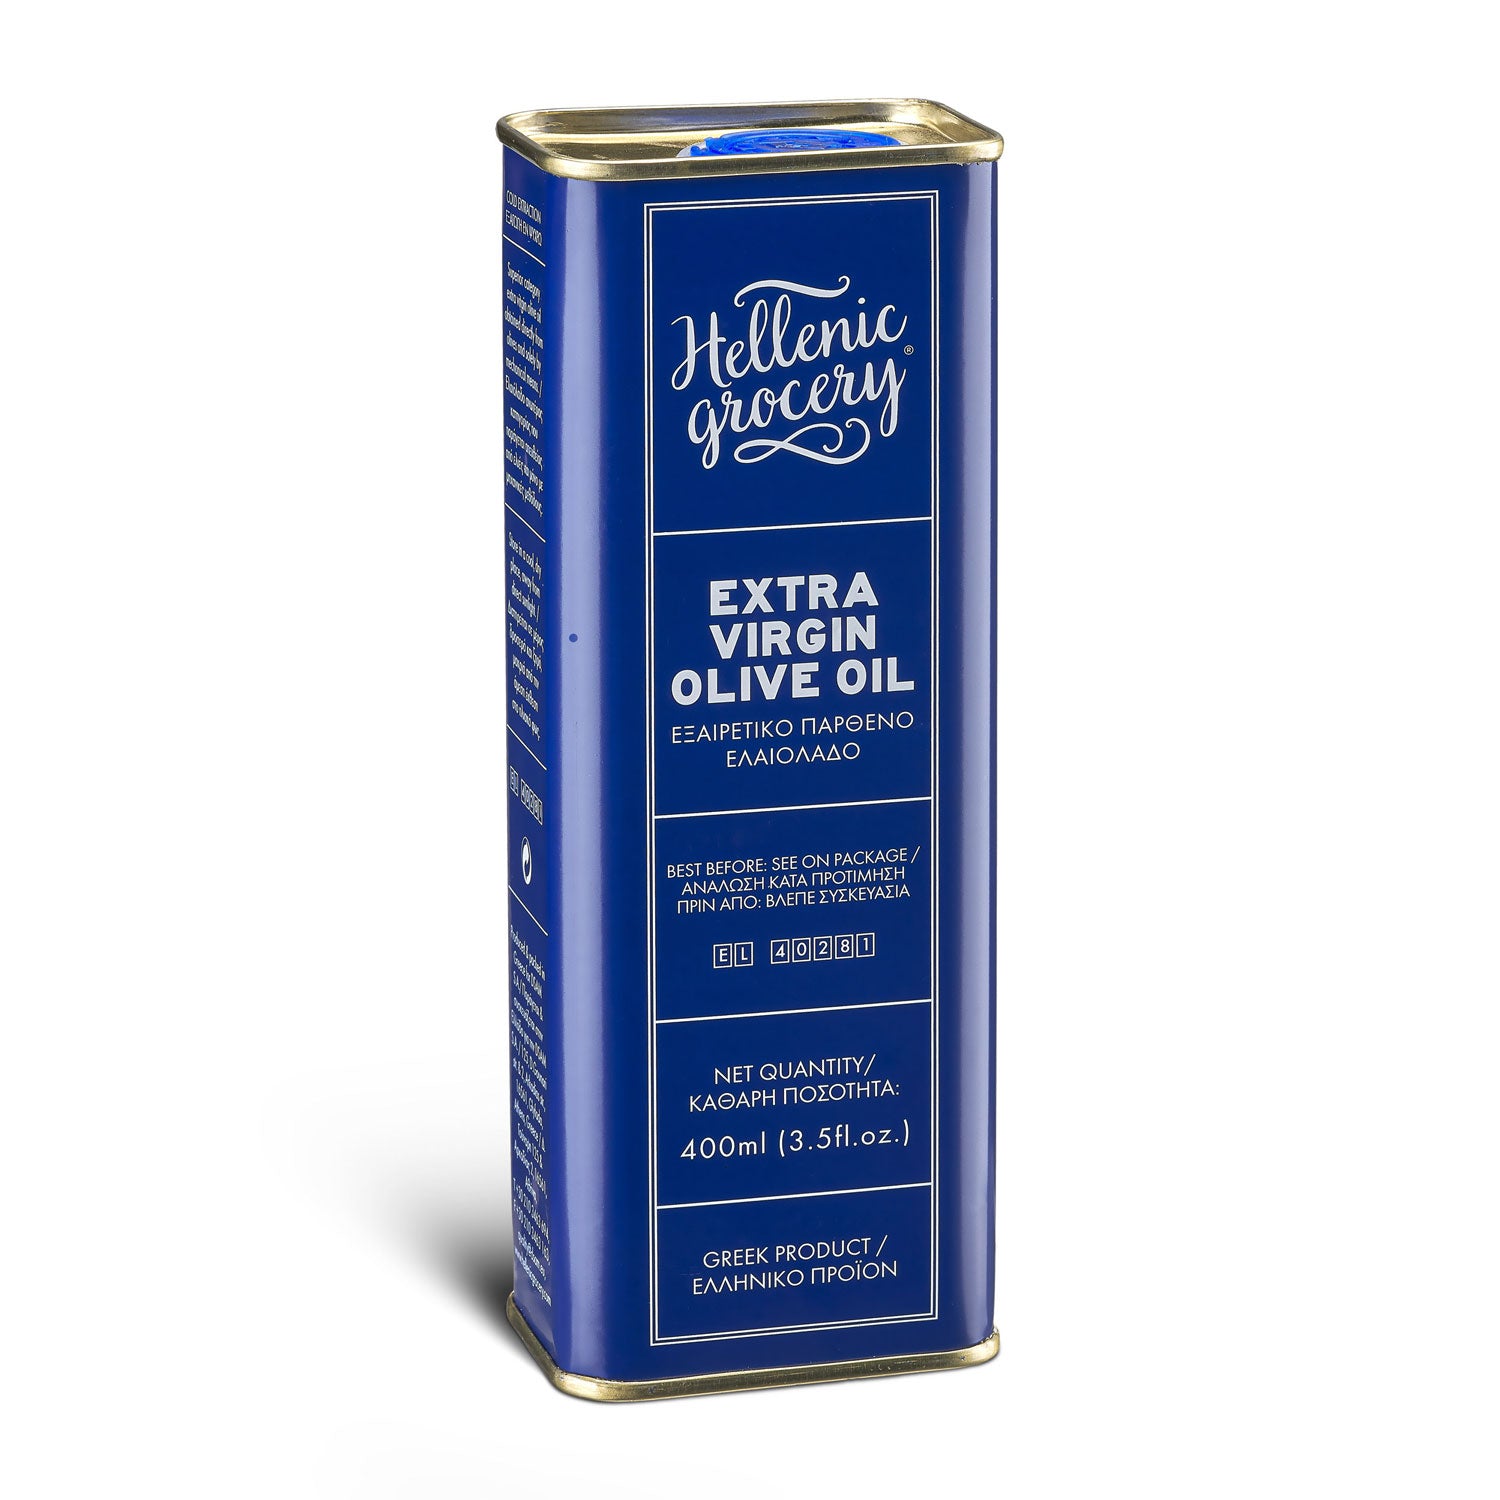 Huile d'Olive Extra Vierge BLUE - 400ml - Hellenic Grocery